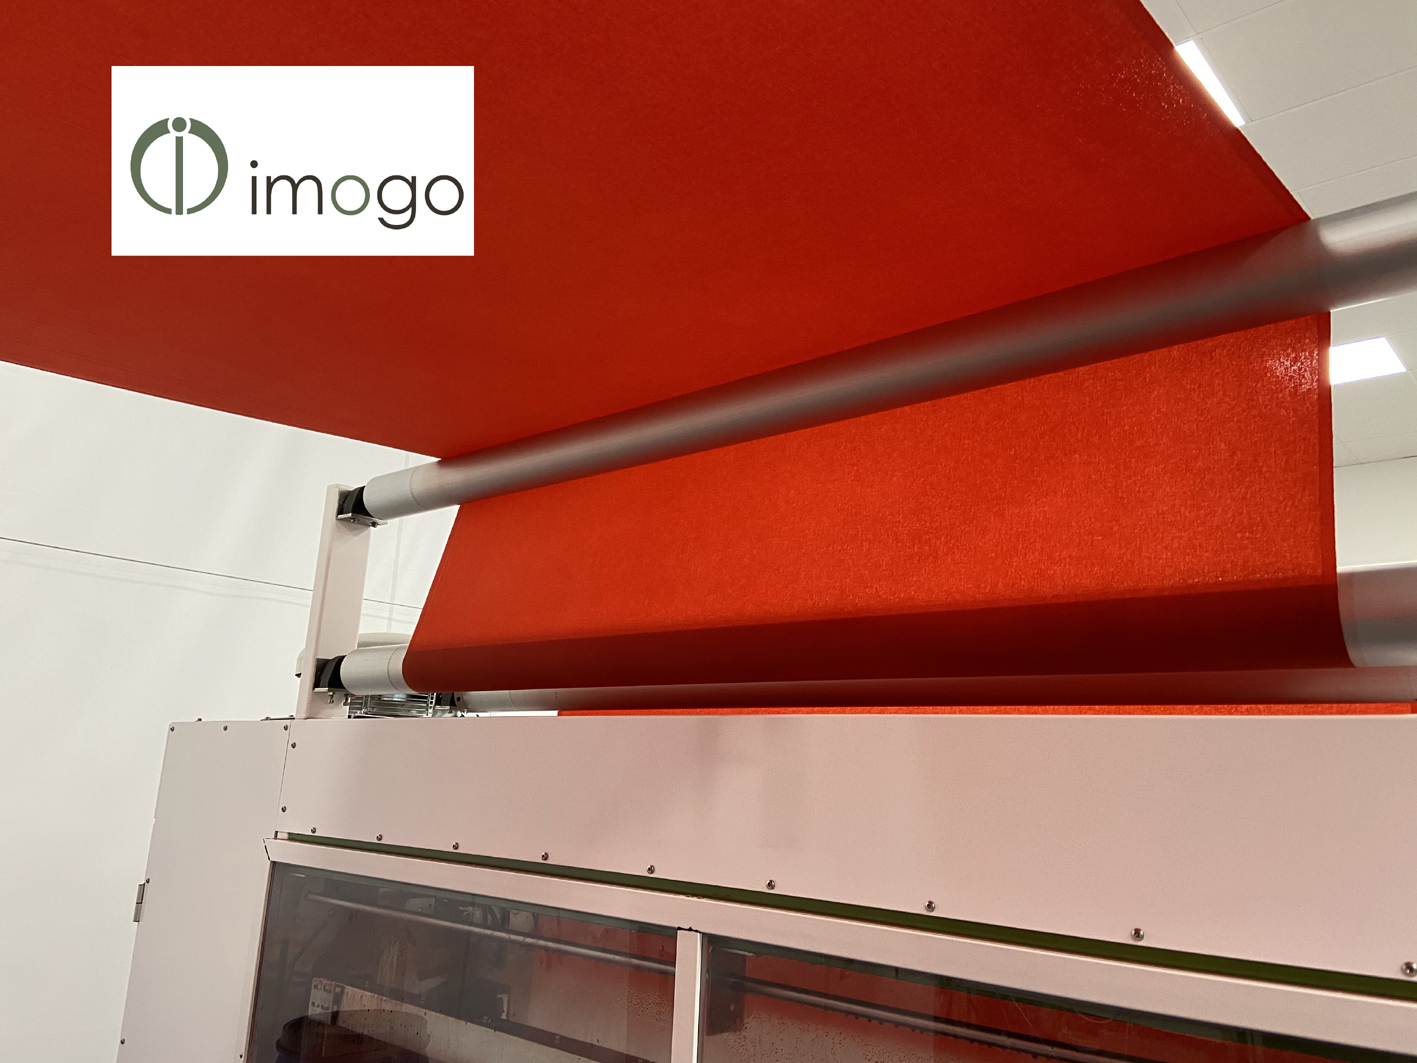 Imogo’s Dye-Max spray dyeing line has the potential to slash the use of fresh water, wastewater, energy and chemicals by as much as 90%. © Imogo